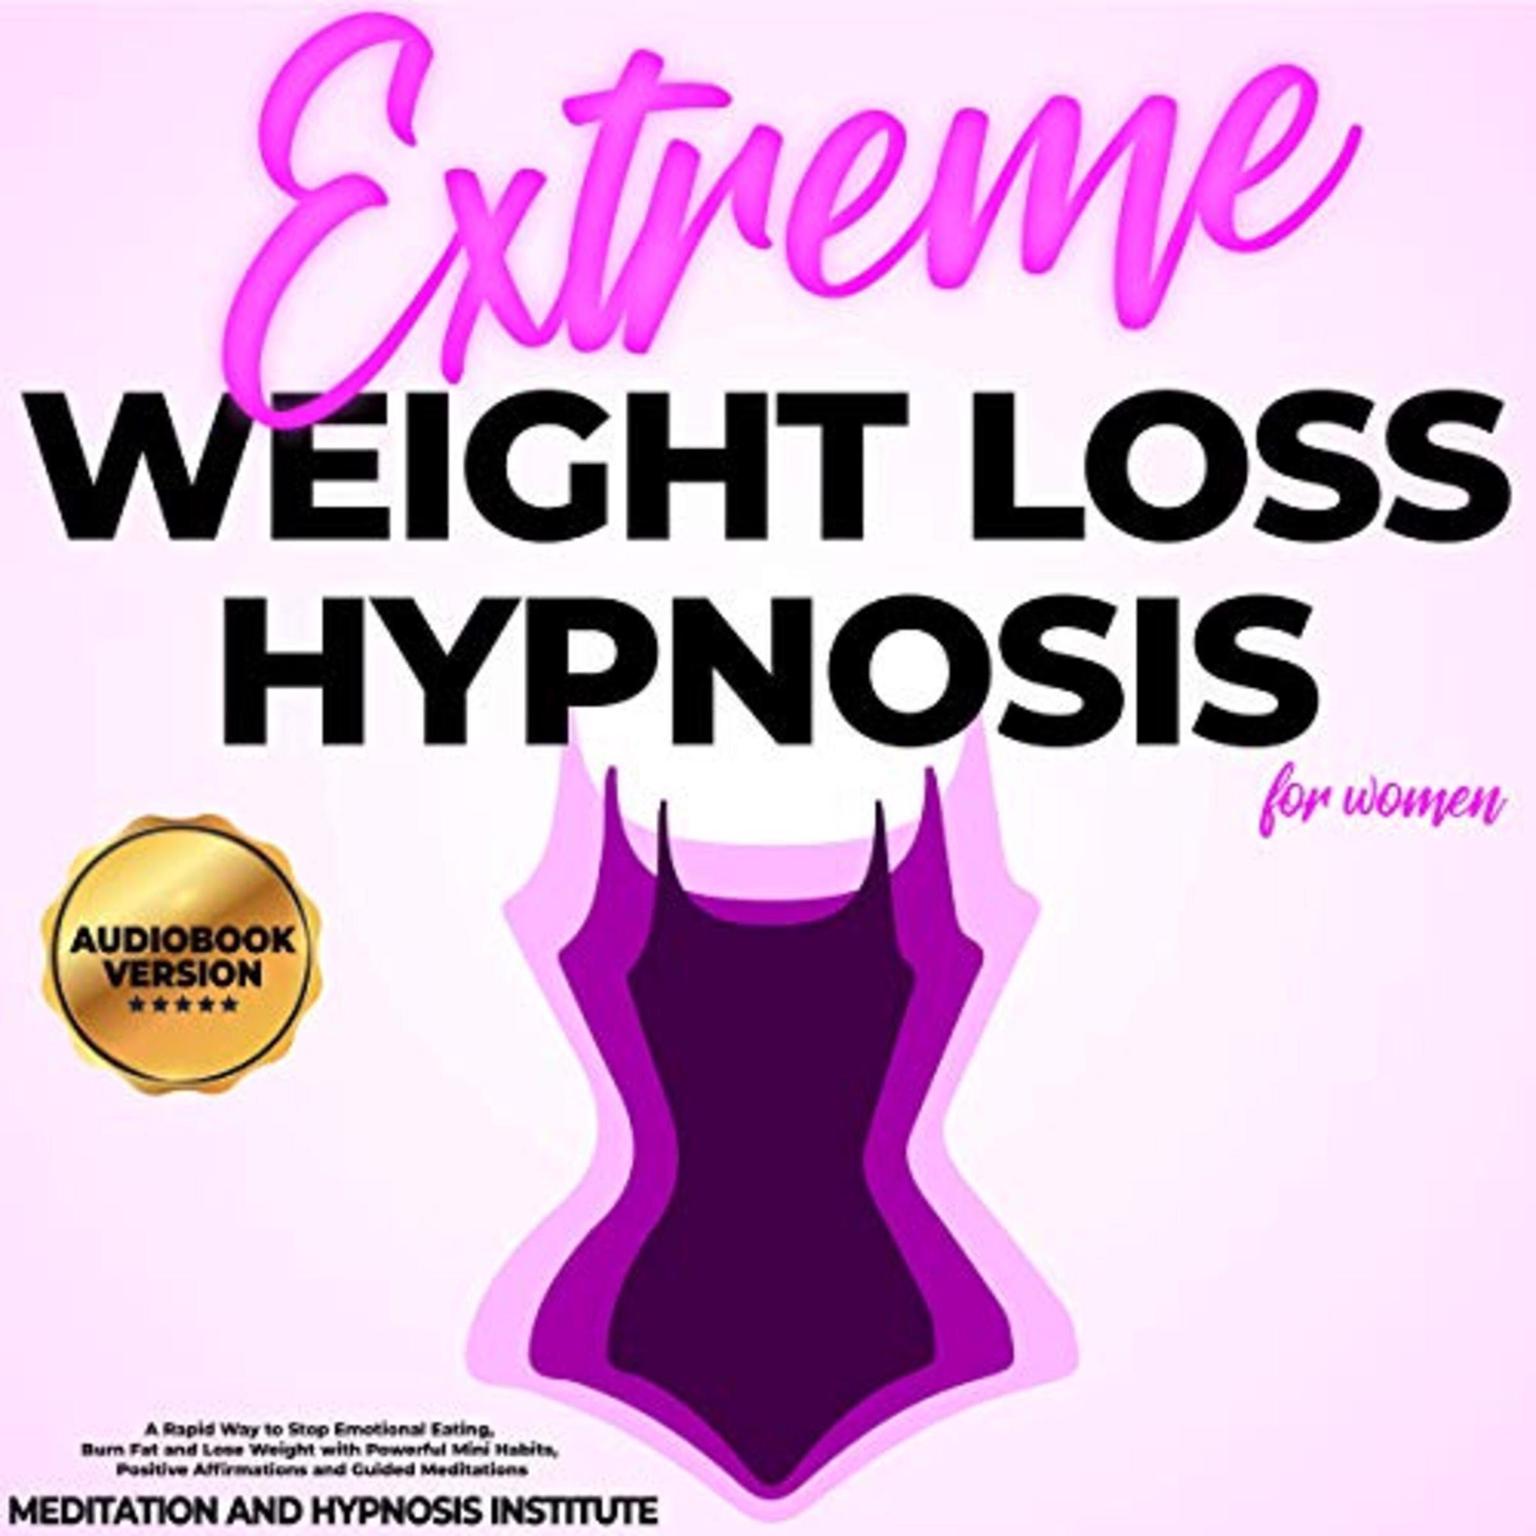 Extreme Weight loss Hypnosis for Women: A Rapid Way to Stop Emotional Eating, Burn Fat and Lose Weight with Powerful Mini Habits, Positive Affirmations and Guided Meditations Audiobook, by Meditation and Hypnosis Institute